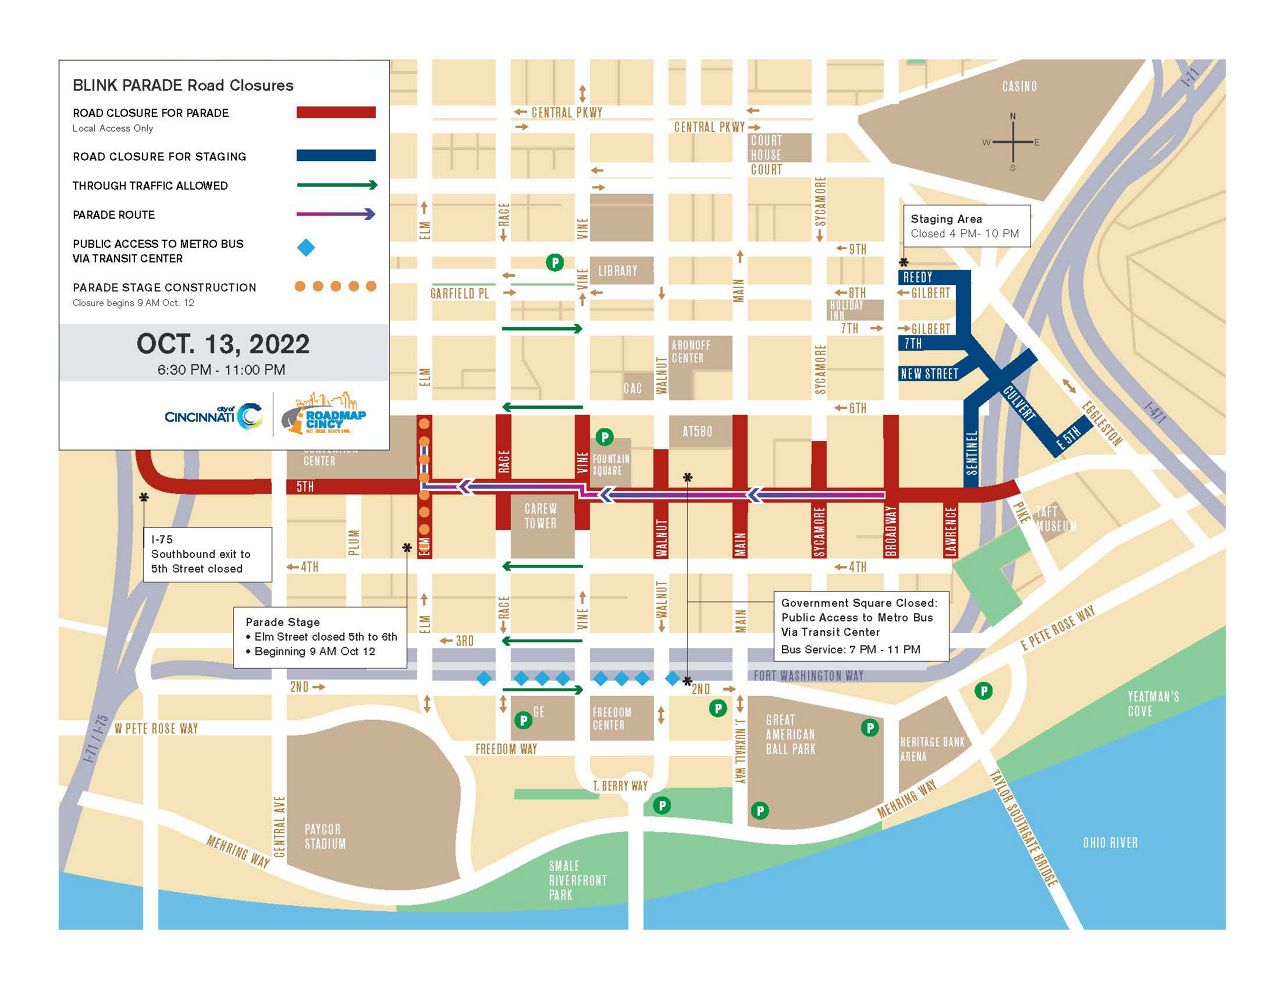 A map of road closures during the BLINK Parade on Thursday, Oct. 13. (Photo courtesy of City of Cincinnati)